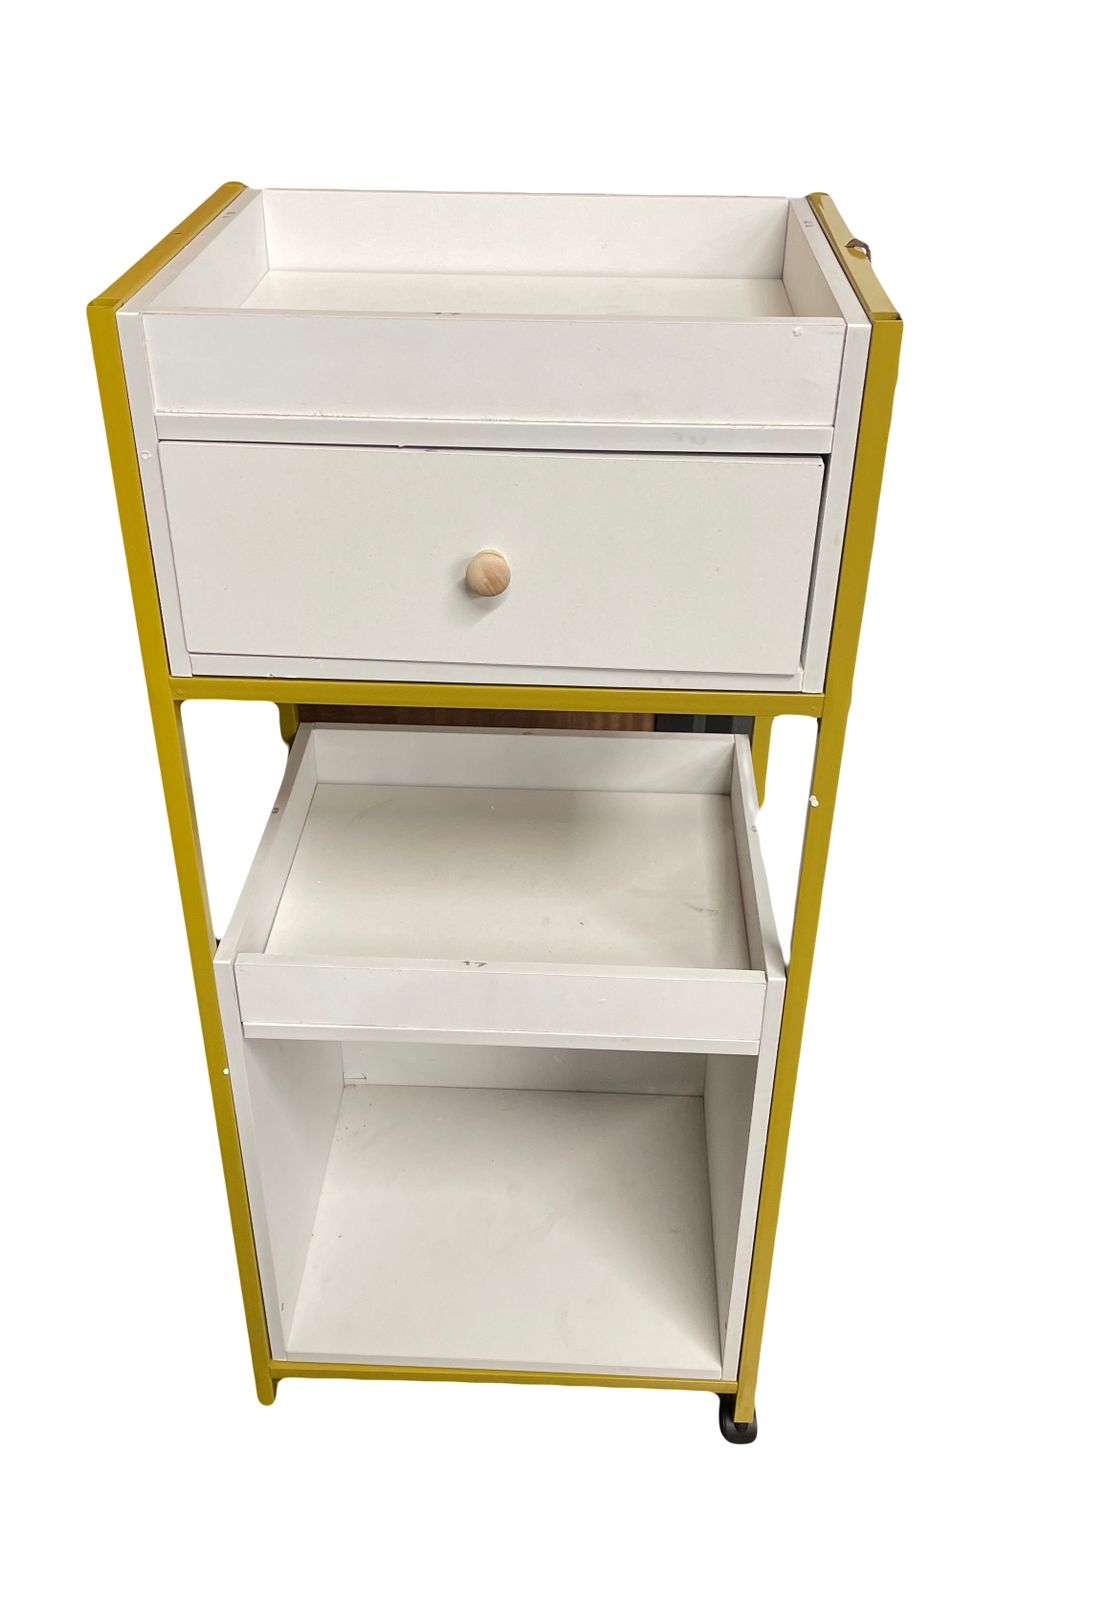 BEAUTY SALON TROLLY CART WITH DRAWER GOLD AND WHITE T-044G